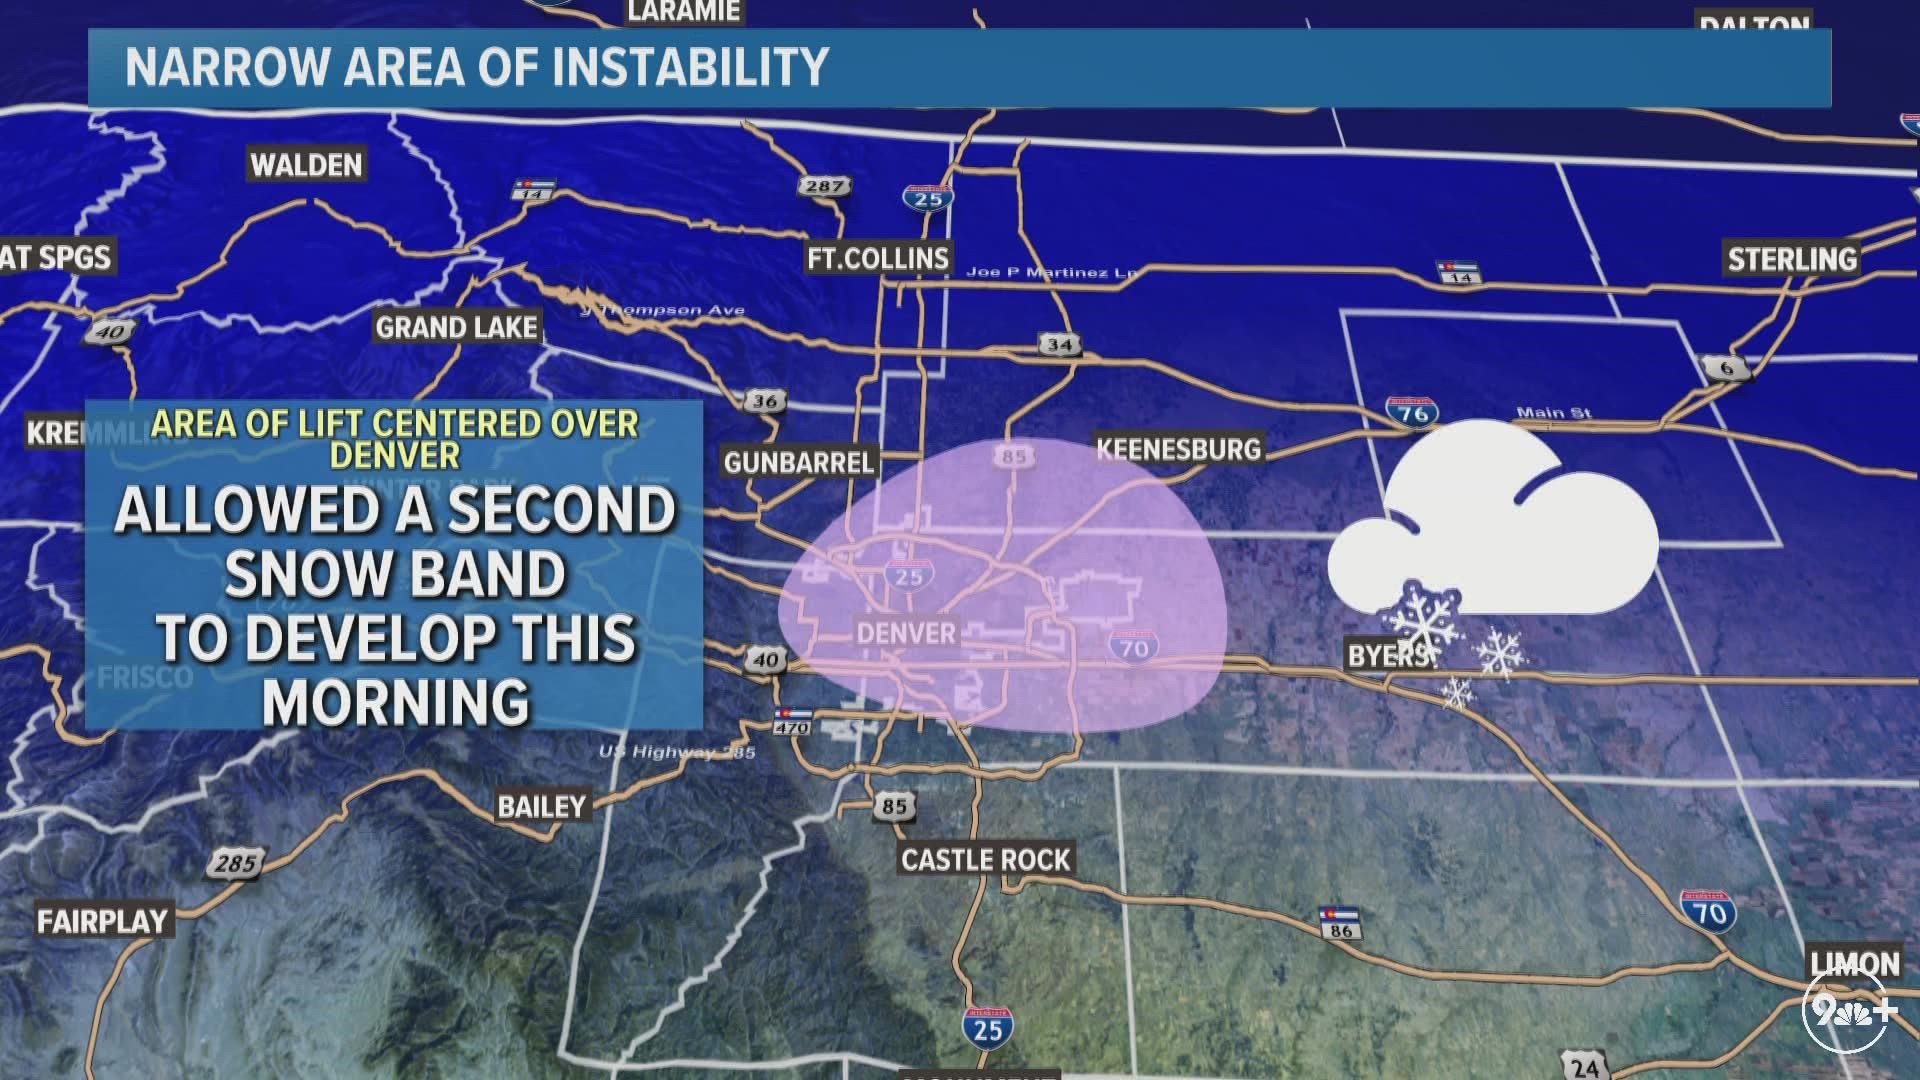 Meteorologist Chris Bianchi breaks down the science behind why Denver received more snow than expected Monday night into Tuesday morning.